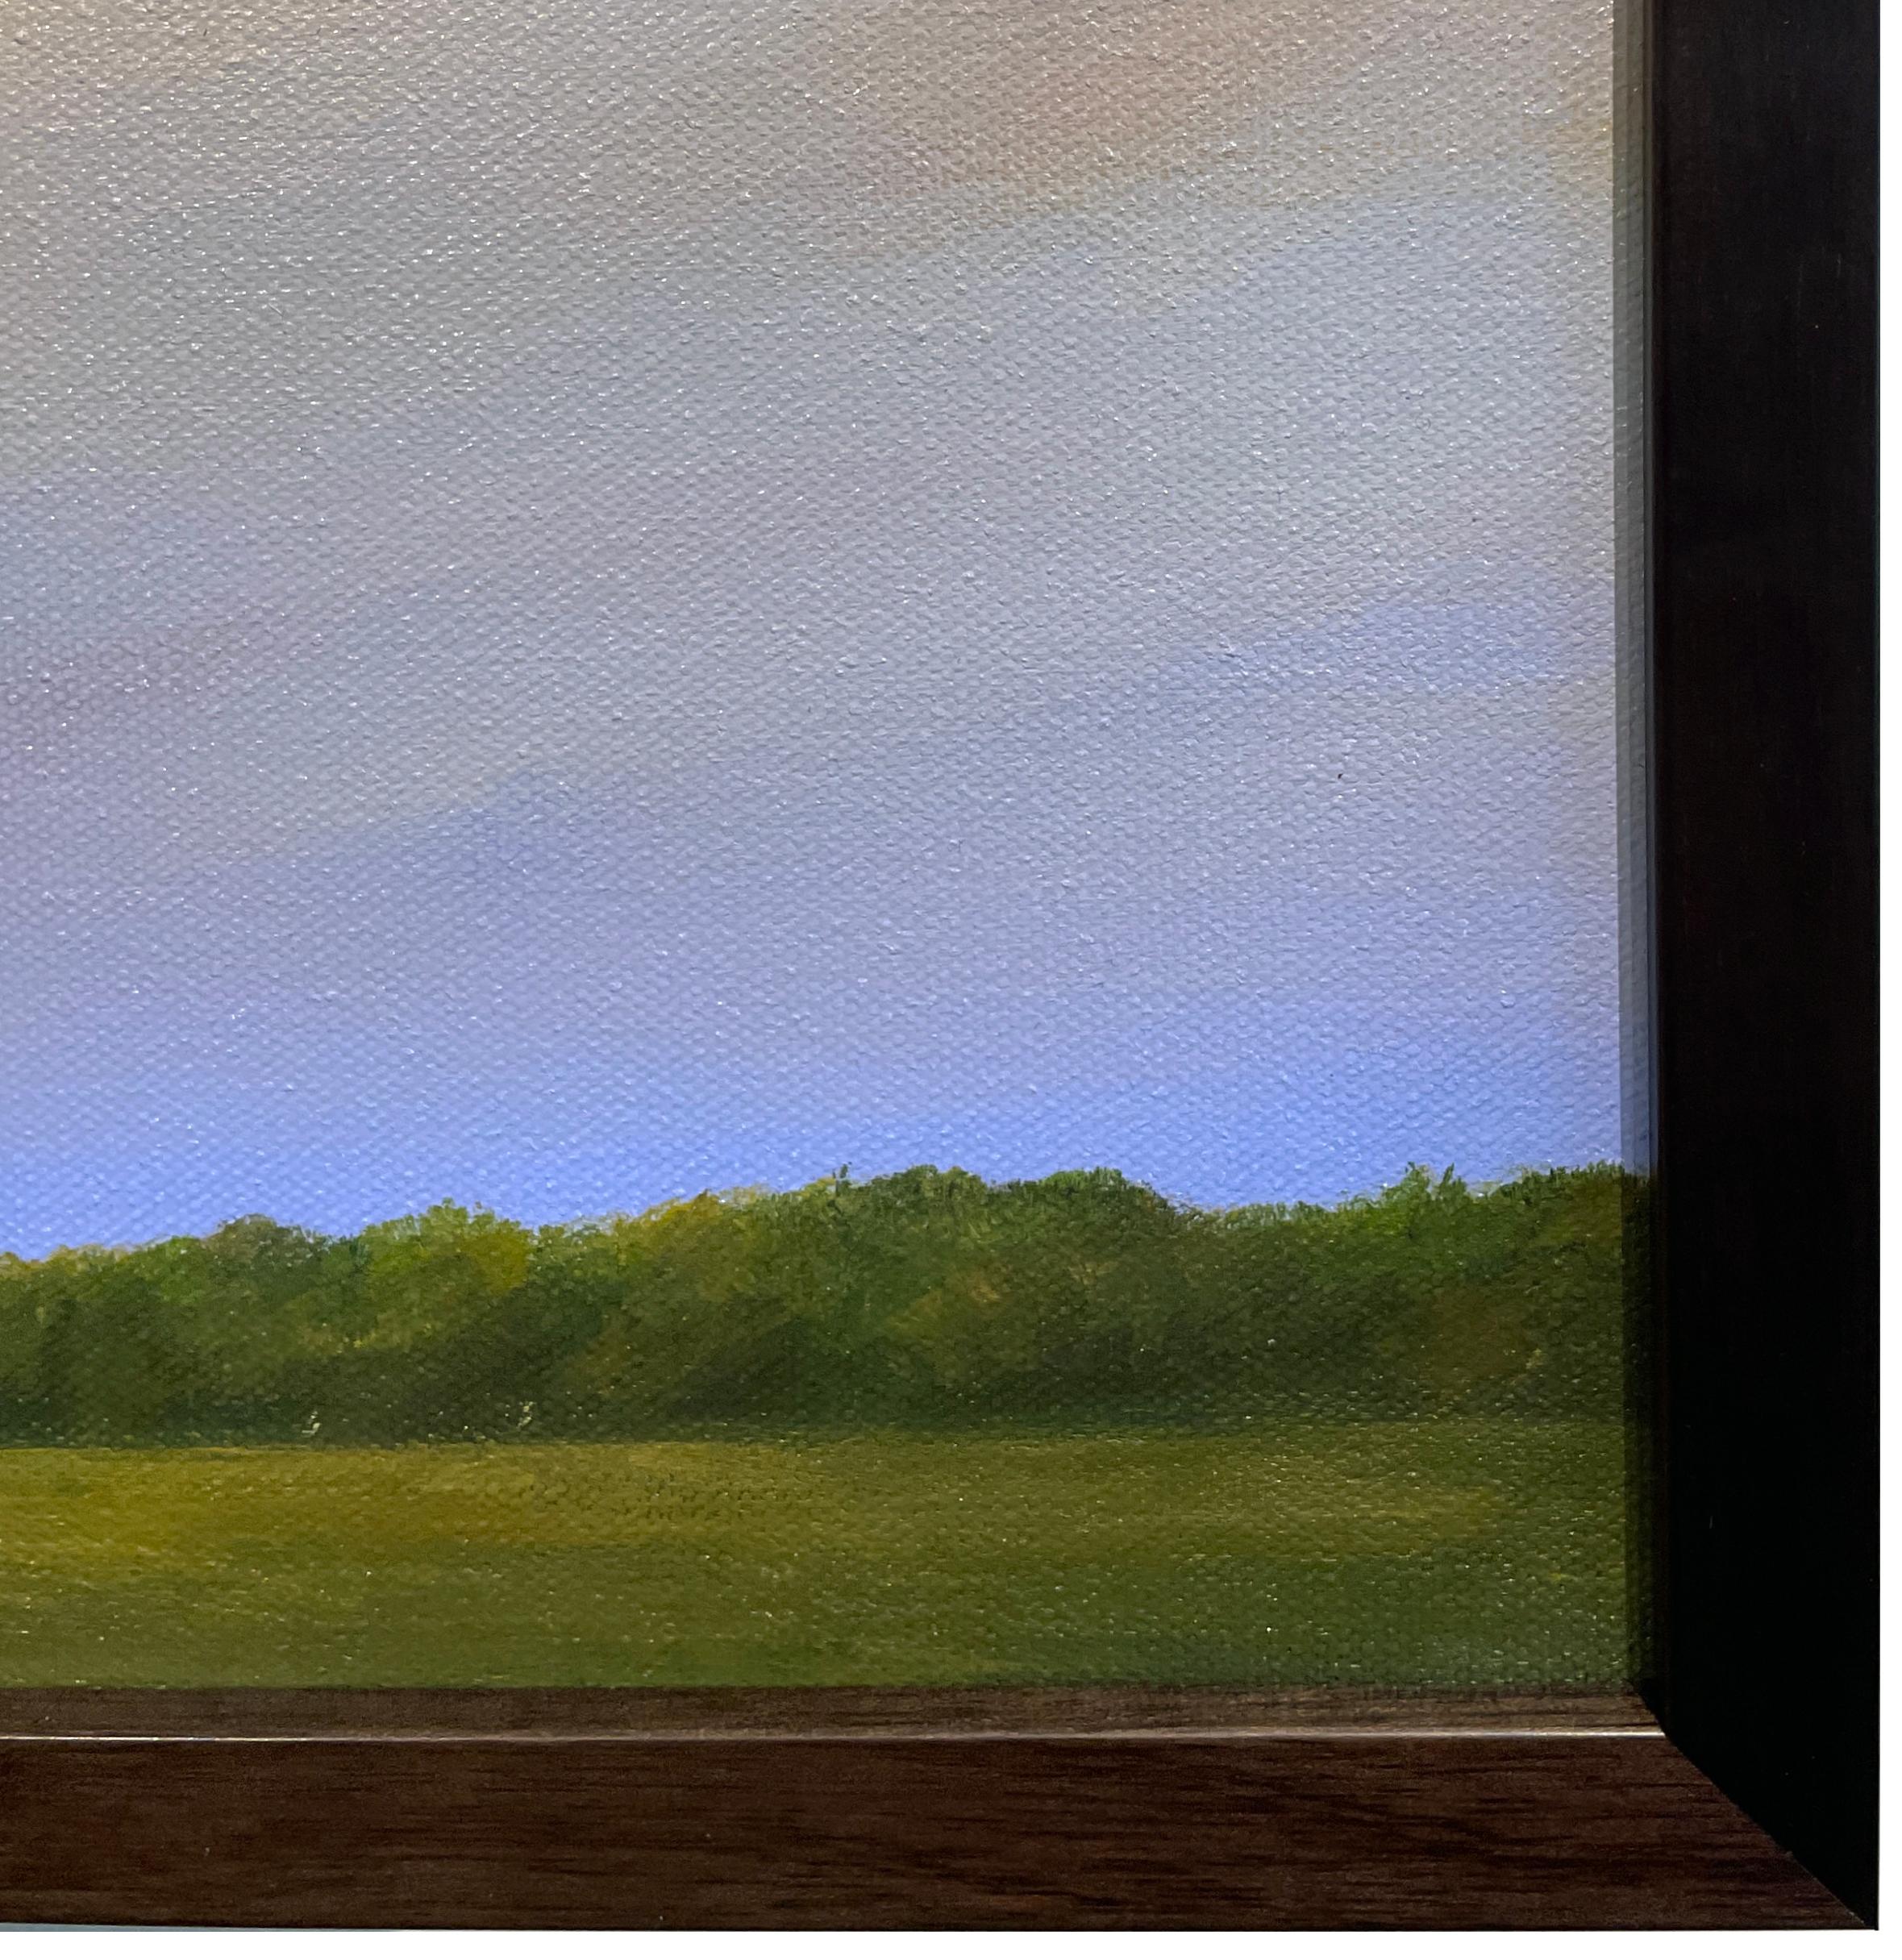 Field North of Chatham - Serene Landscape with Vast Cloudy Sky, Framed - Gray Landscape Painting by Ahzad Bogosian